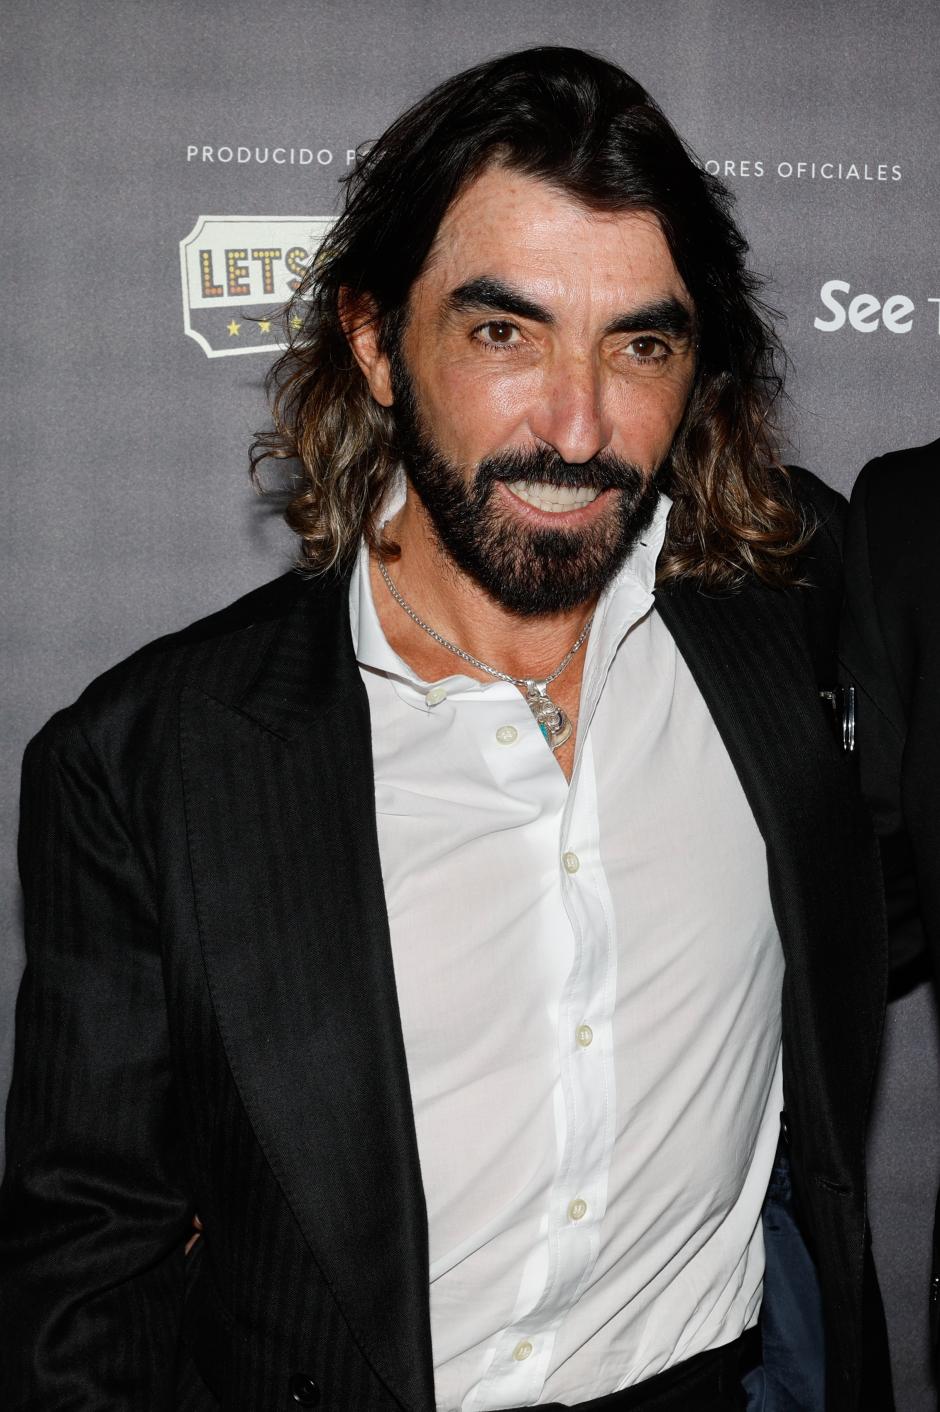 Javier Hidalgo at photocall for premiere Oco, The show in Madrid on Thursday, 13 April 2023.